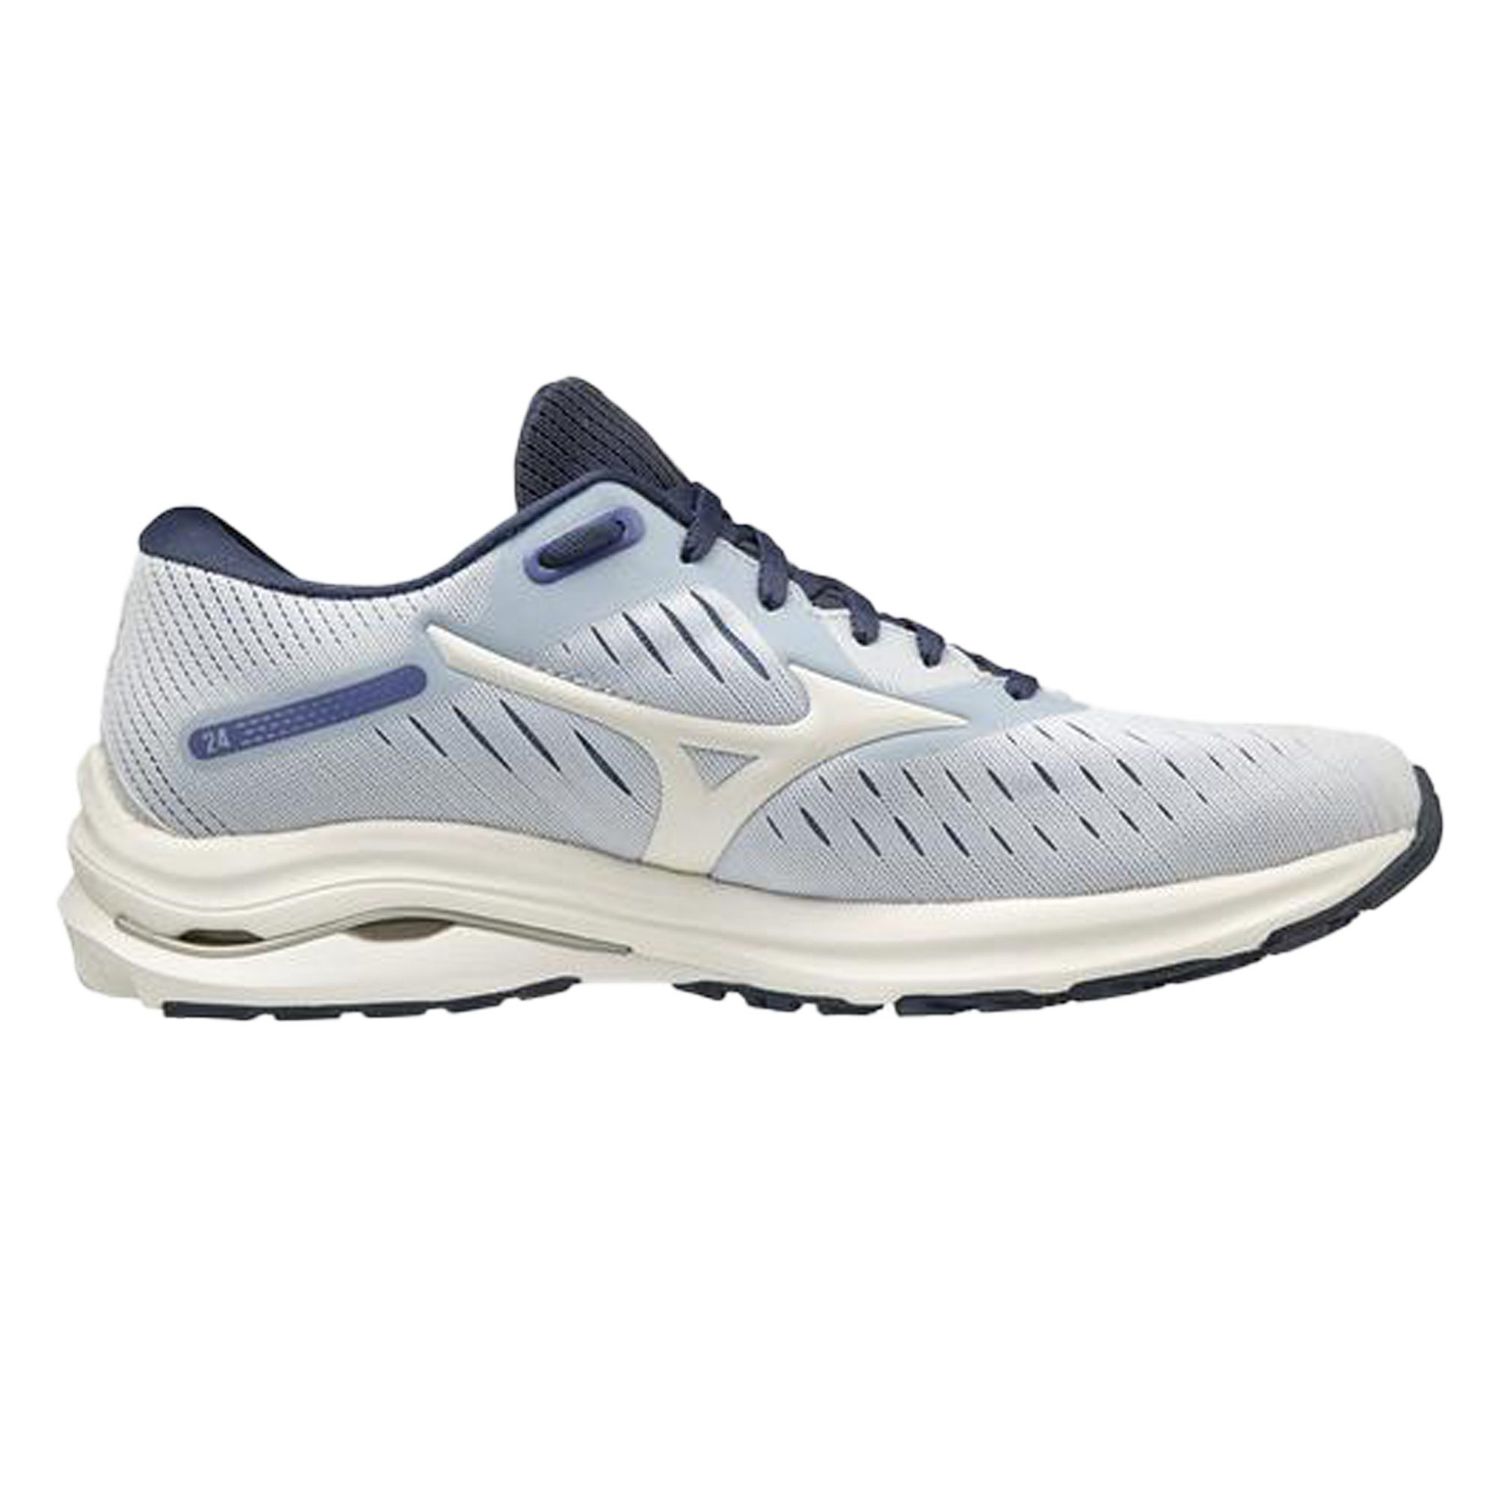 The Best Running Shoes For Pronation And Why I Recommend Them (2021) Mizuno Women's Wave Rider 24 Running Shoe